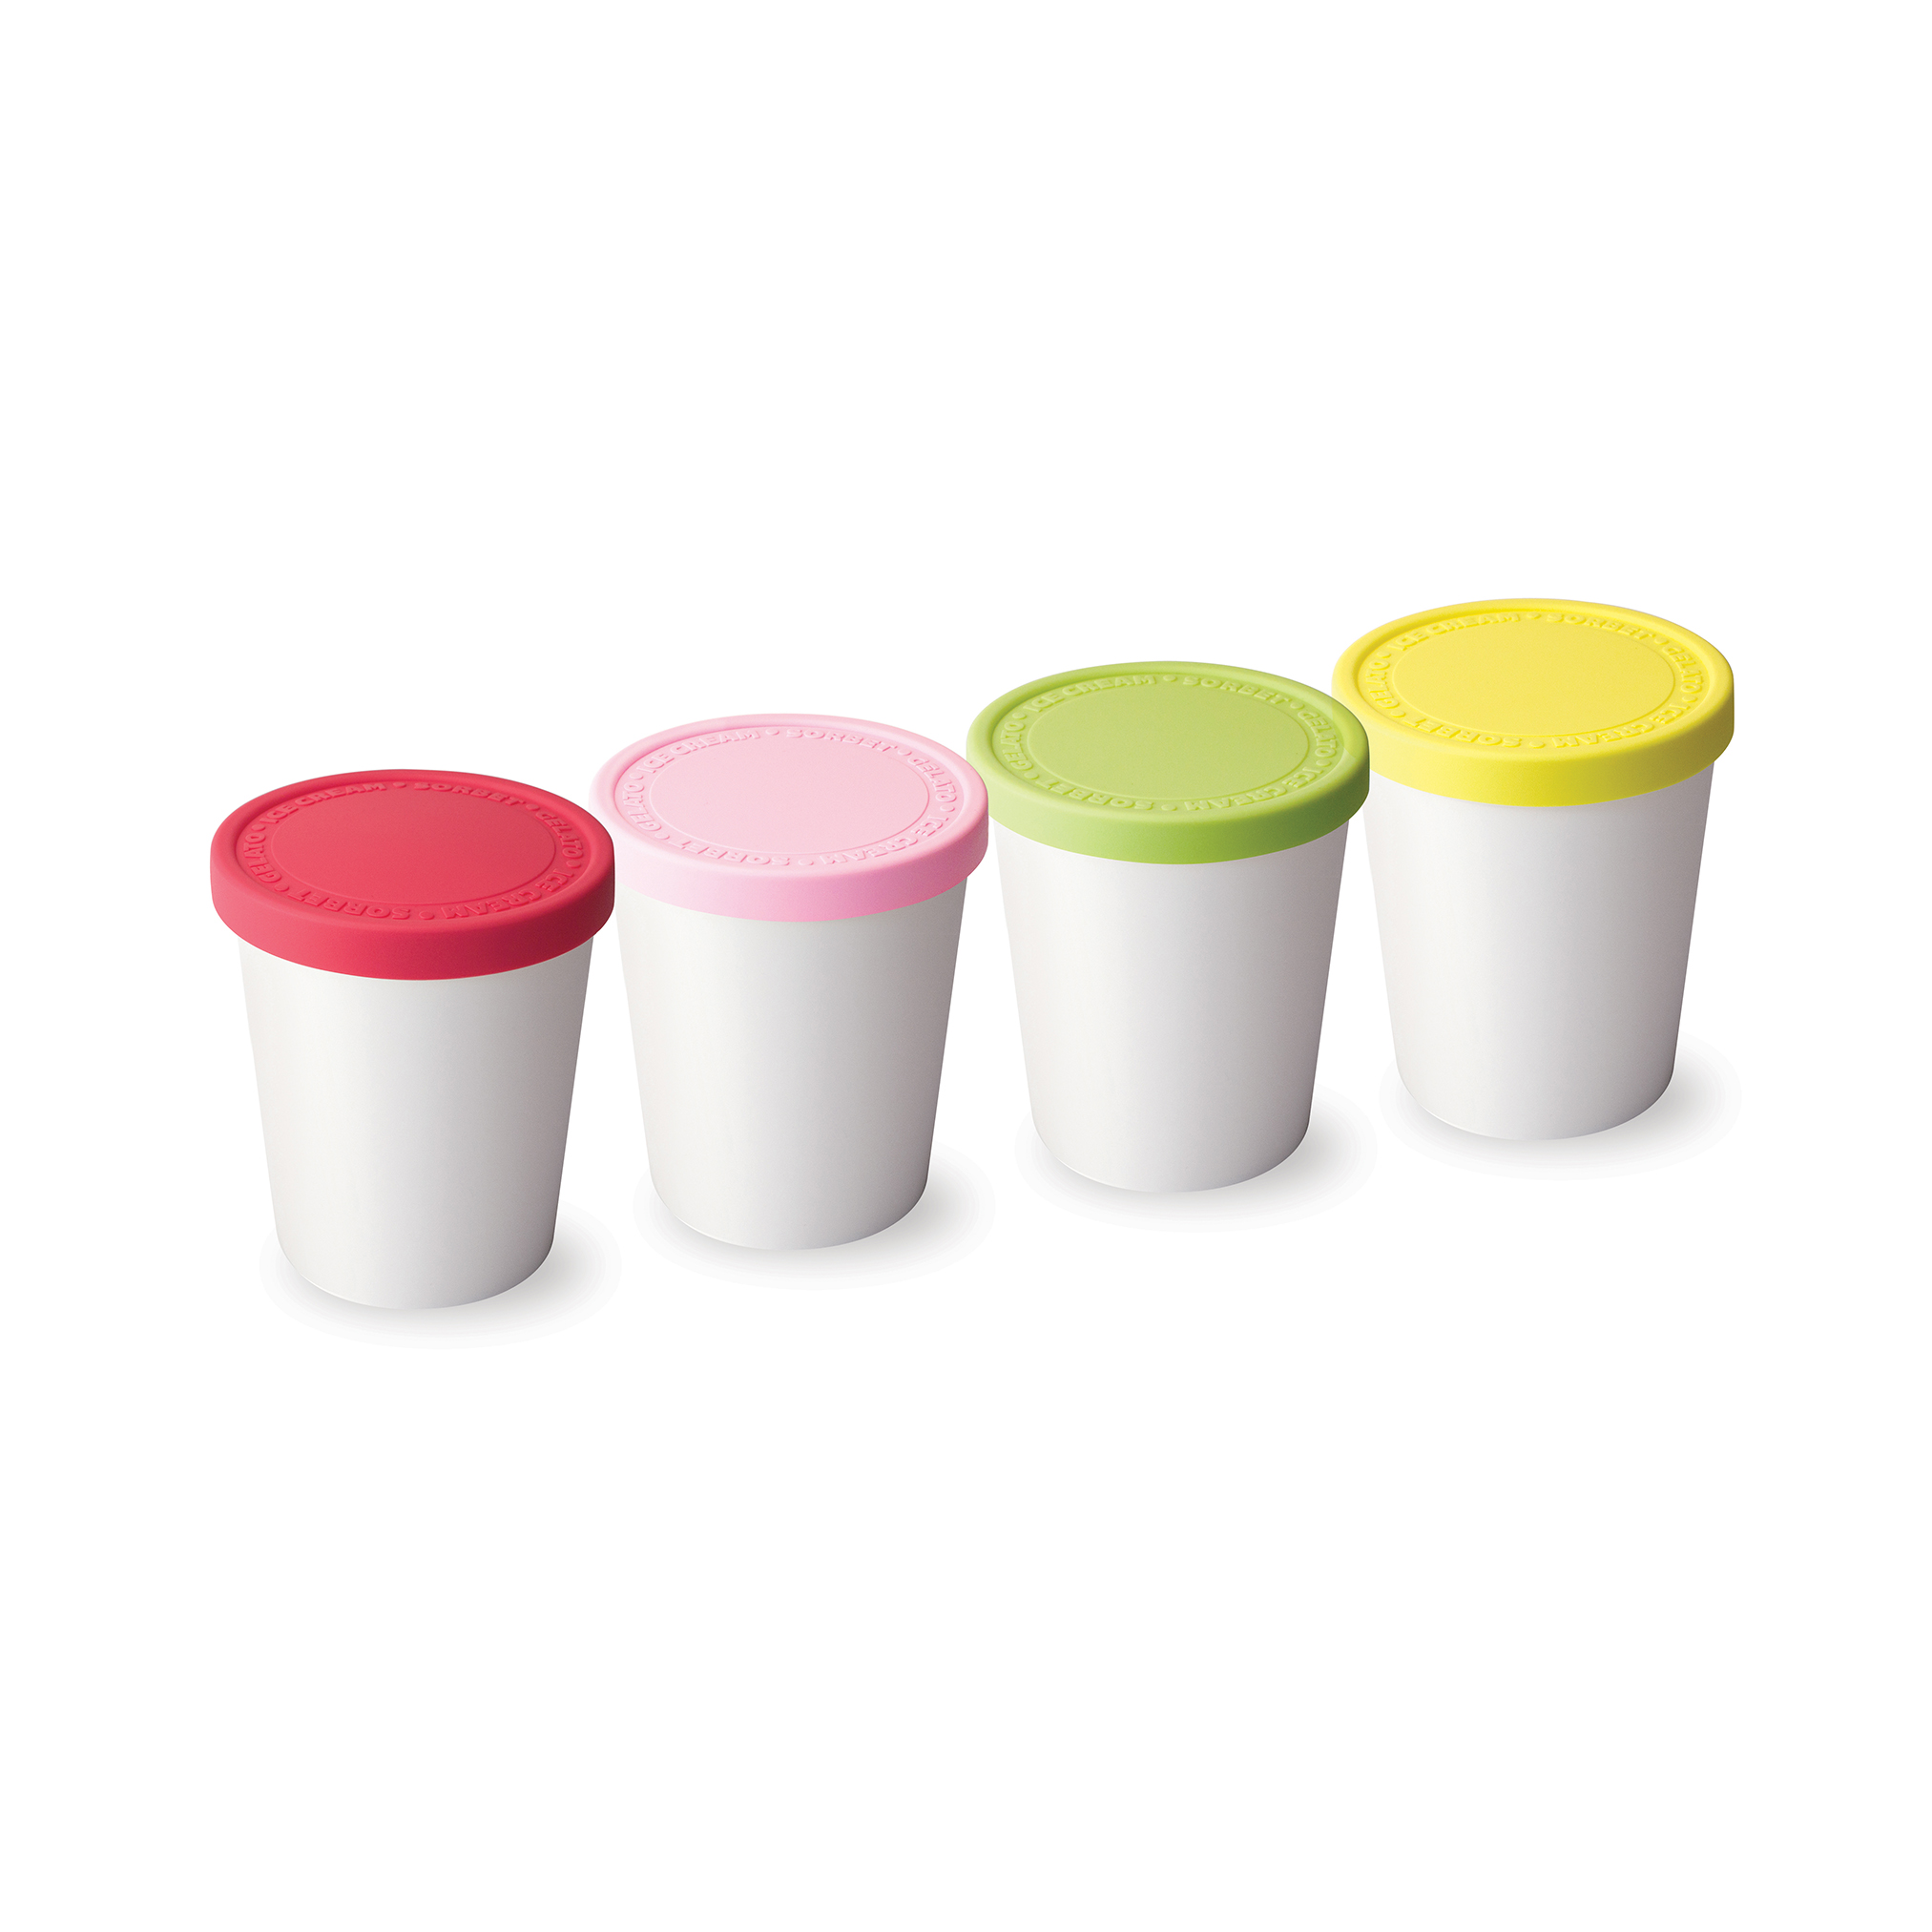 StarPack Long Scoop Ice Cream Freezer Storage Containers Set of 2